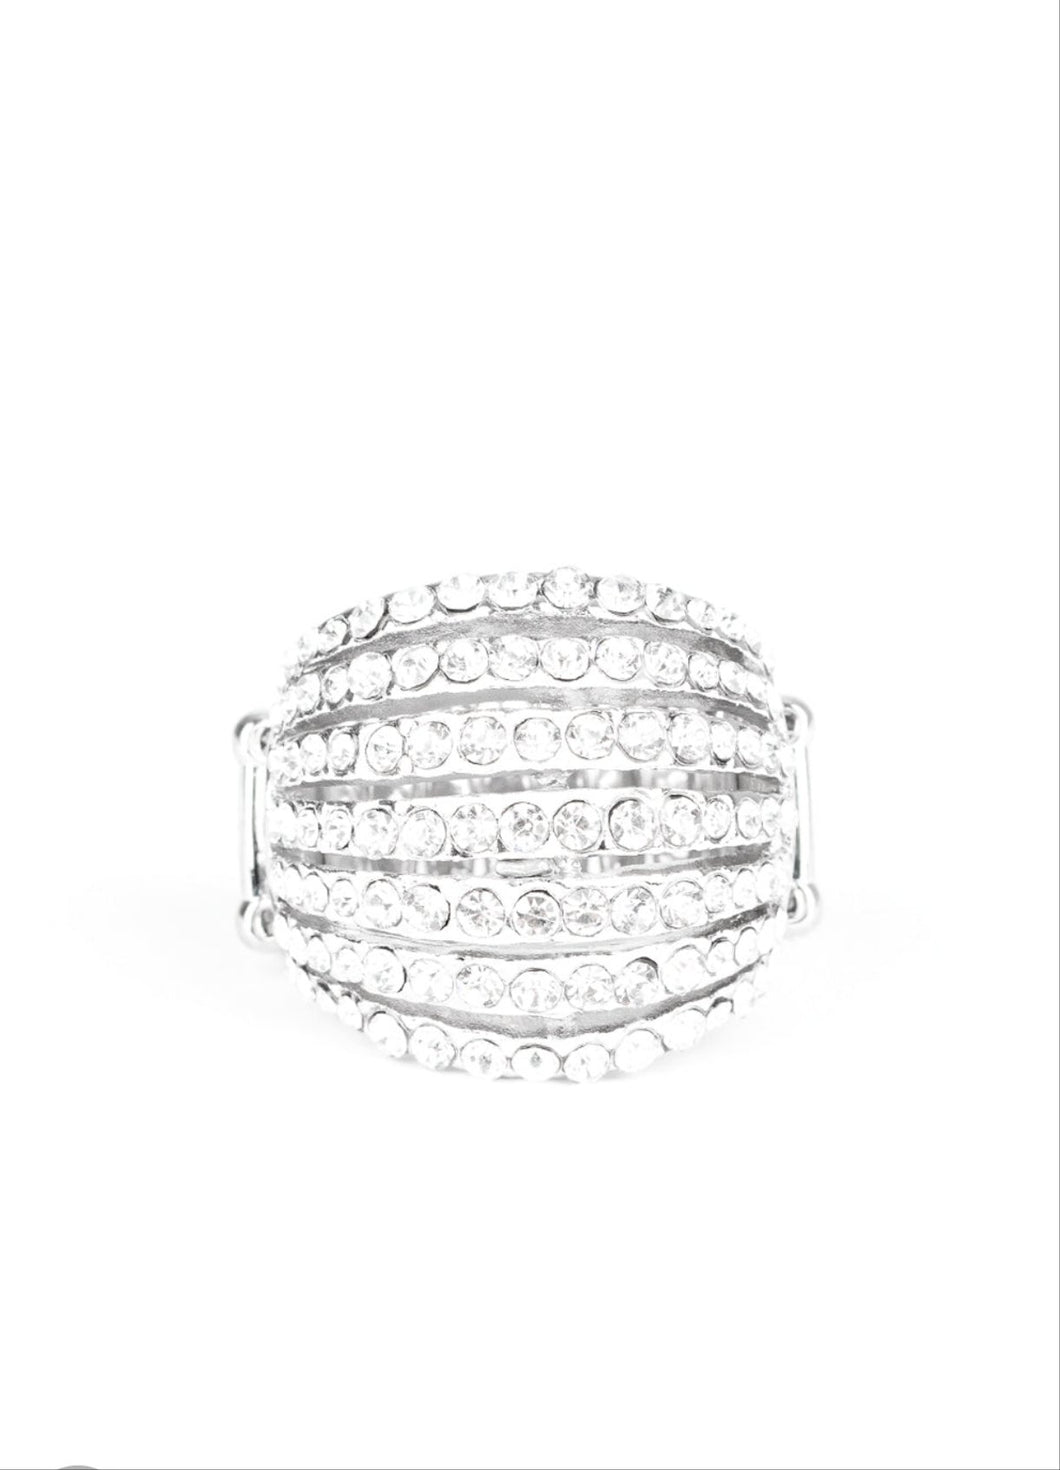 Blinding Brilliance Silver and Bling Ring